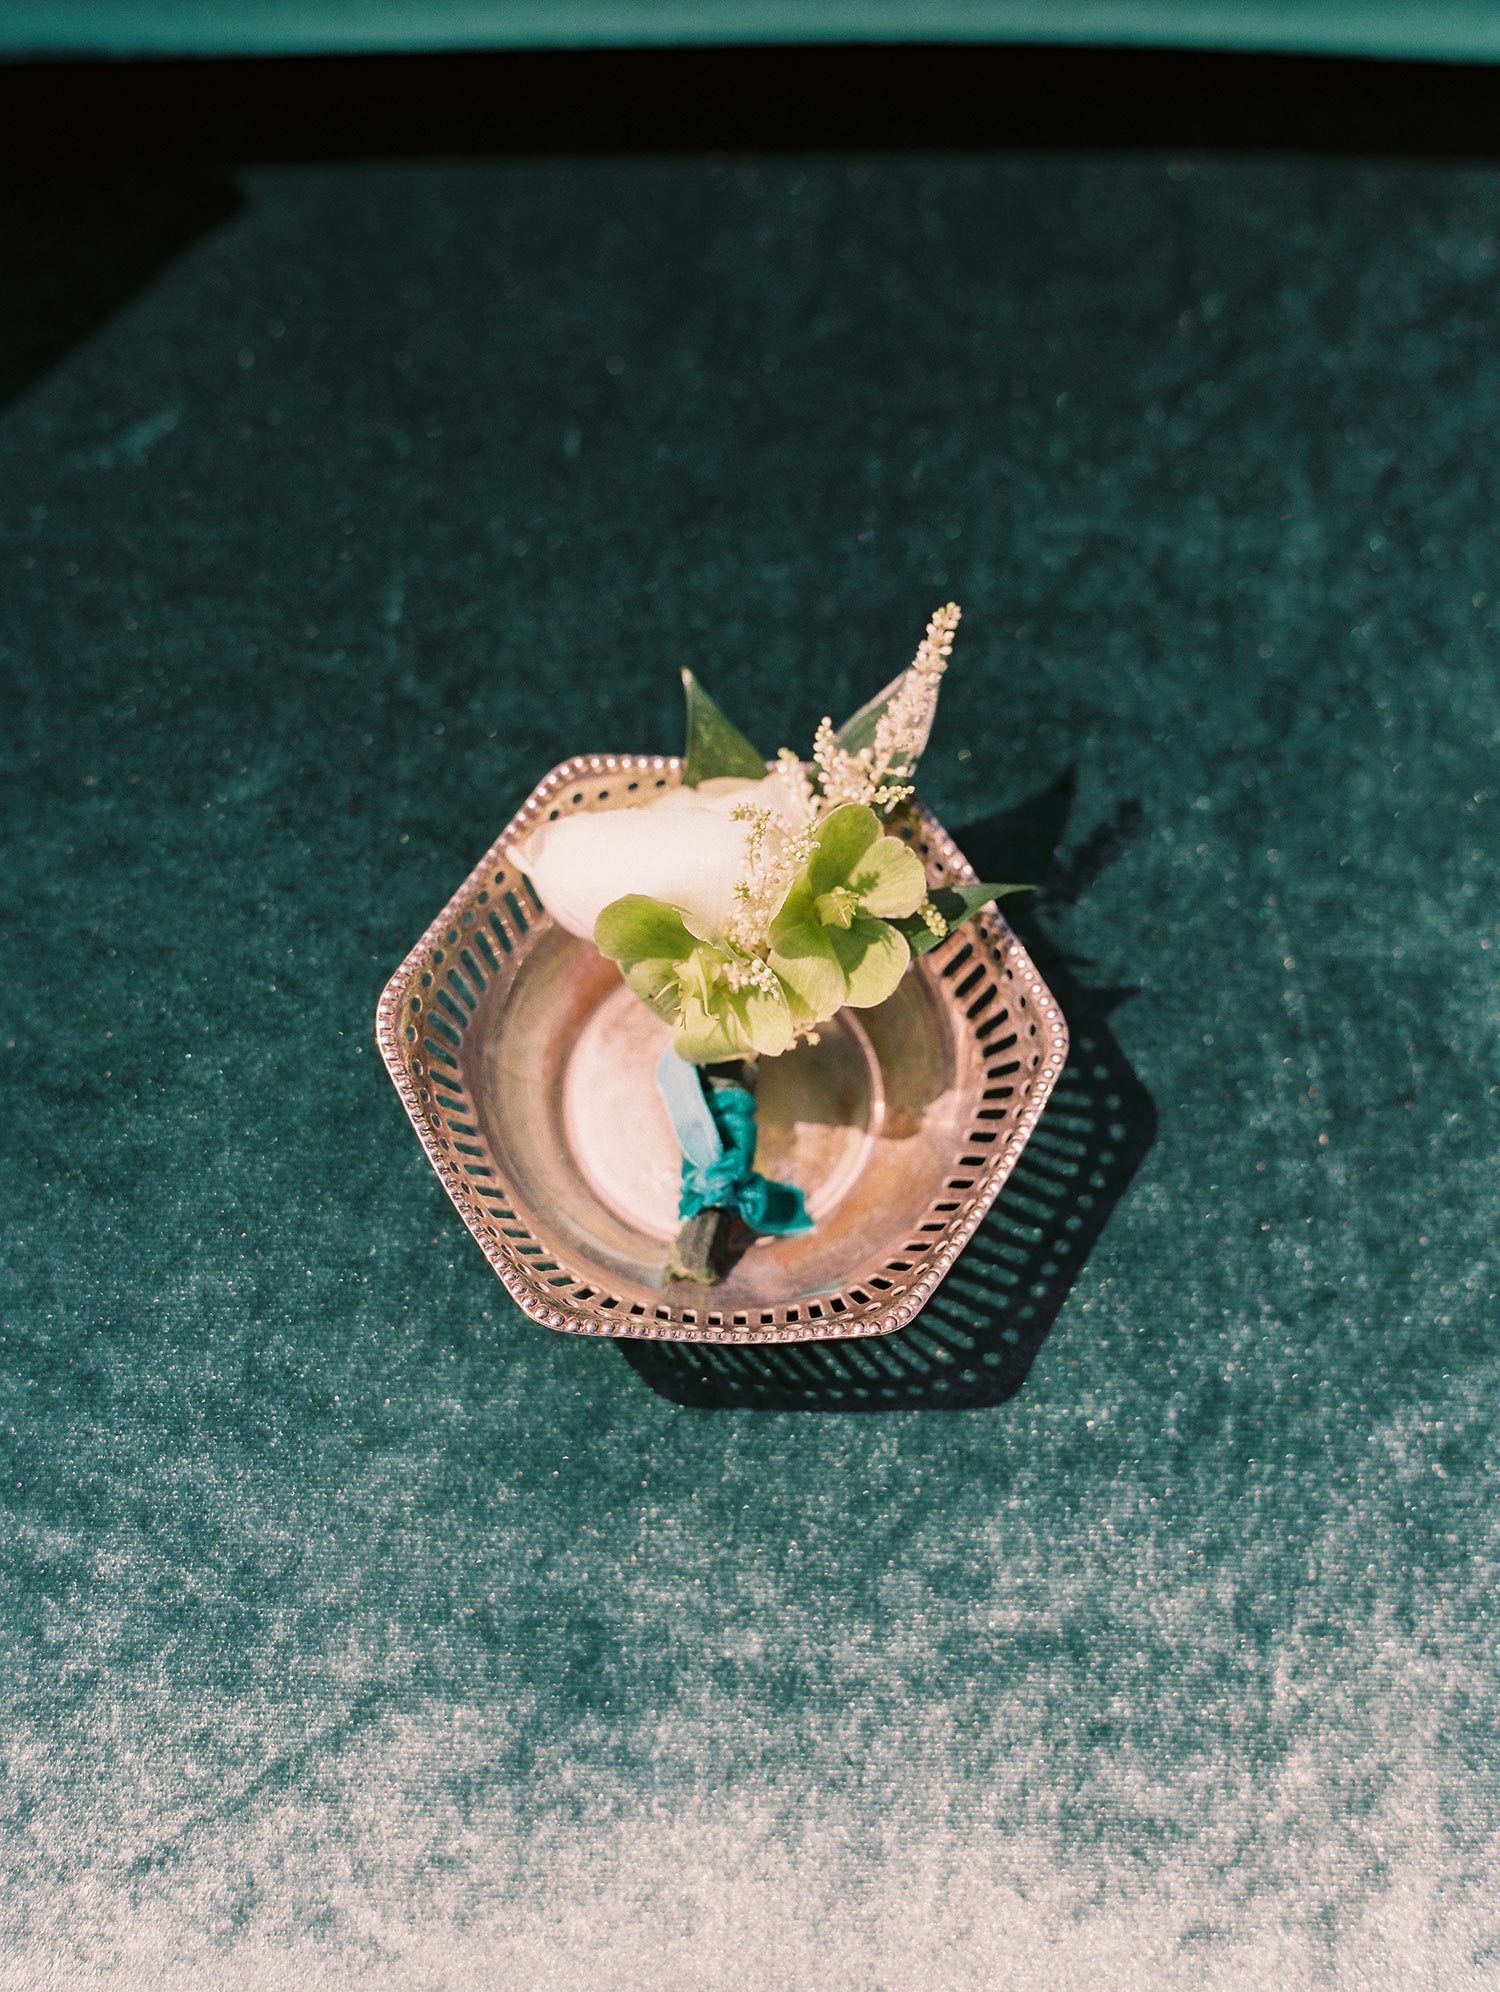 Groom's white boutonniere with a velvet green tie